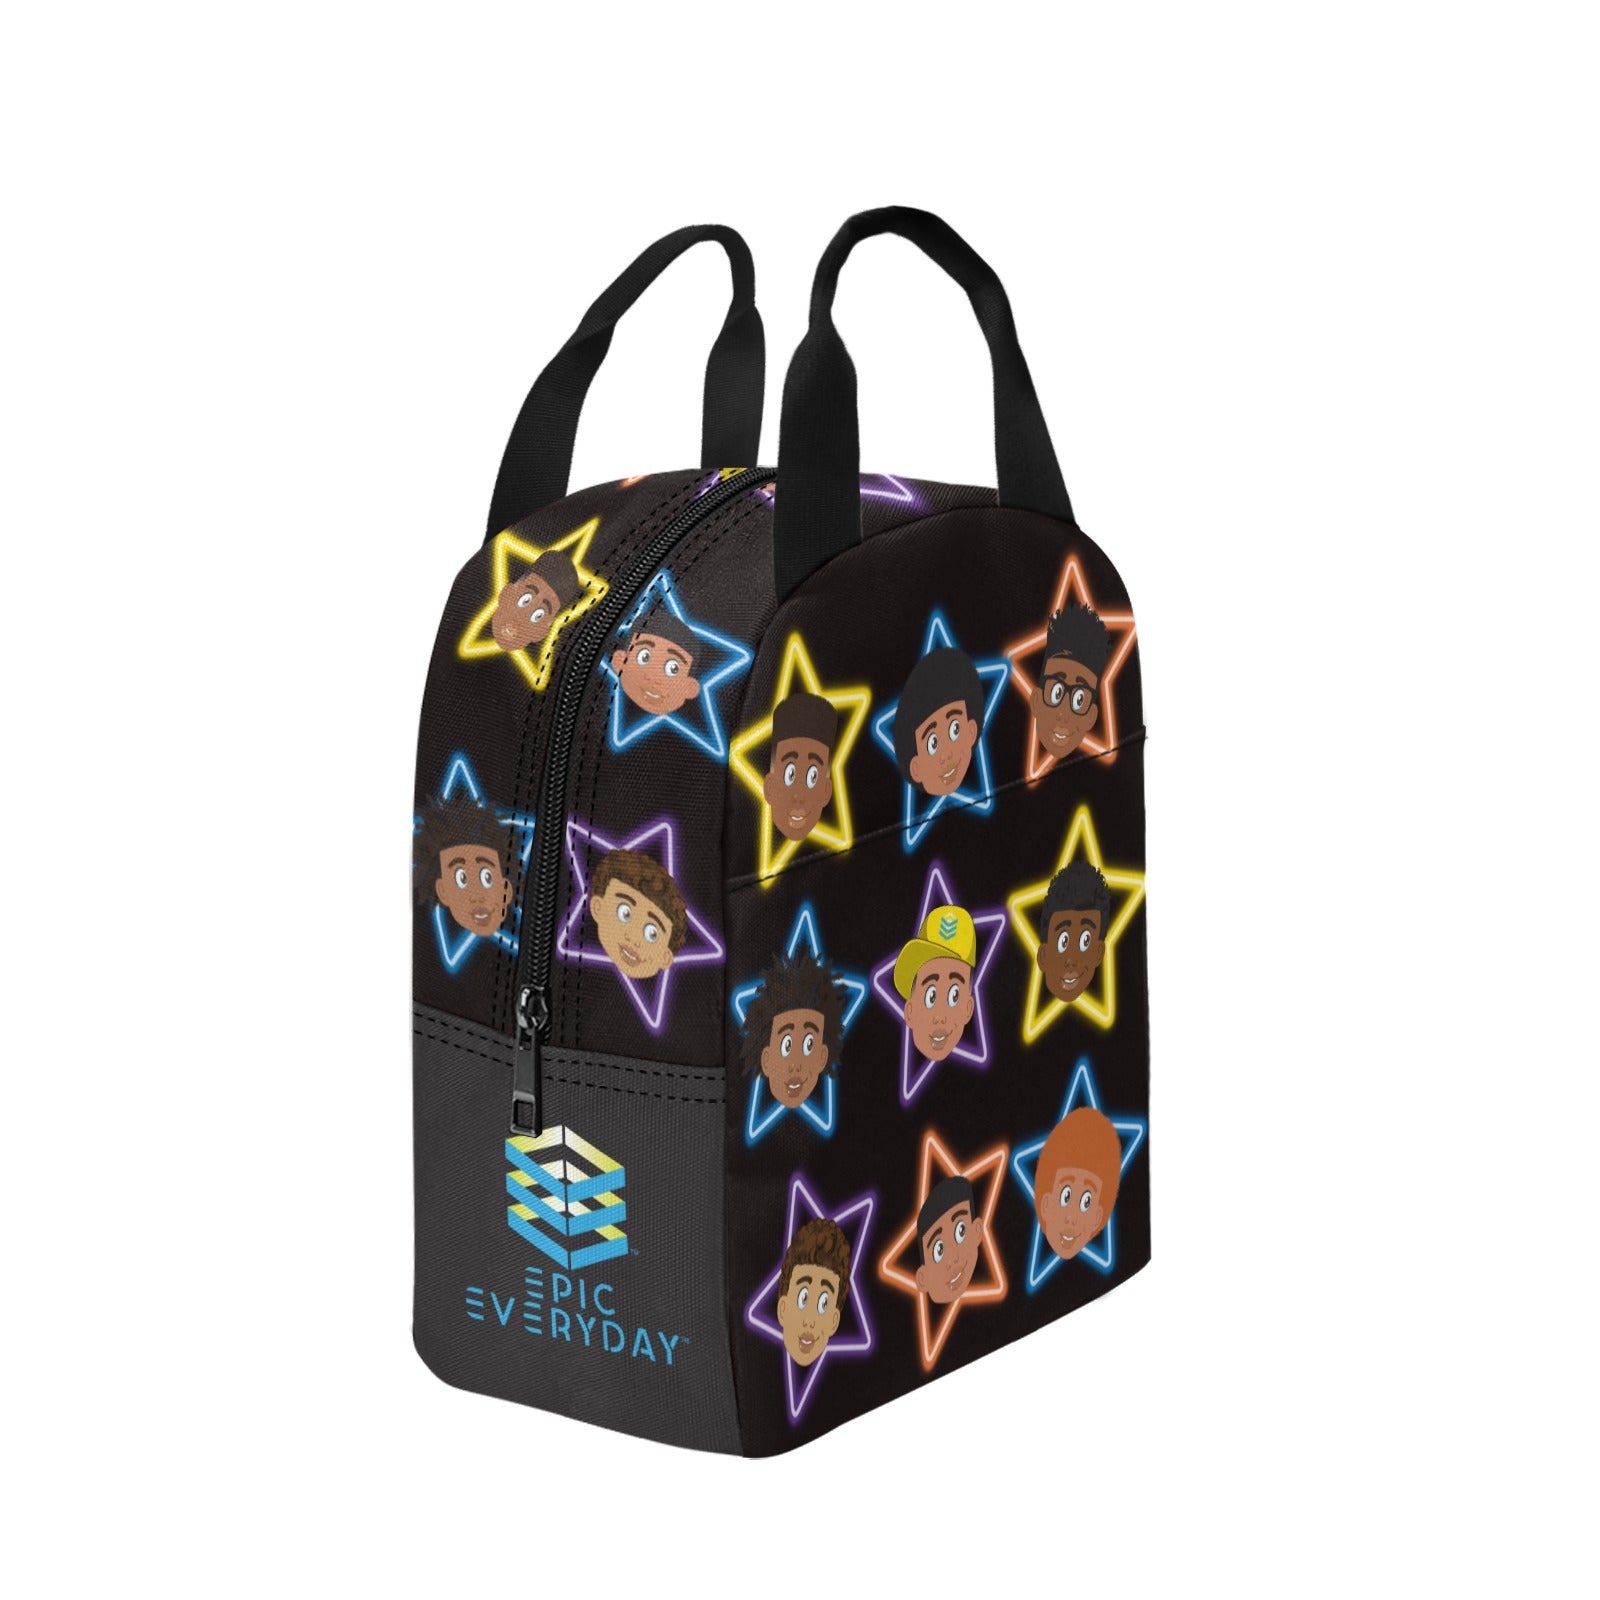 Adonis Light Weight And Stylish Lunch Bag For Kids, Girls & Boys